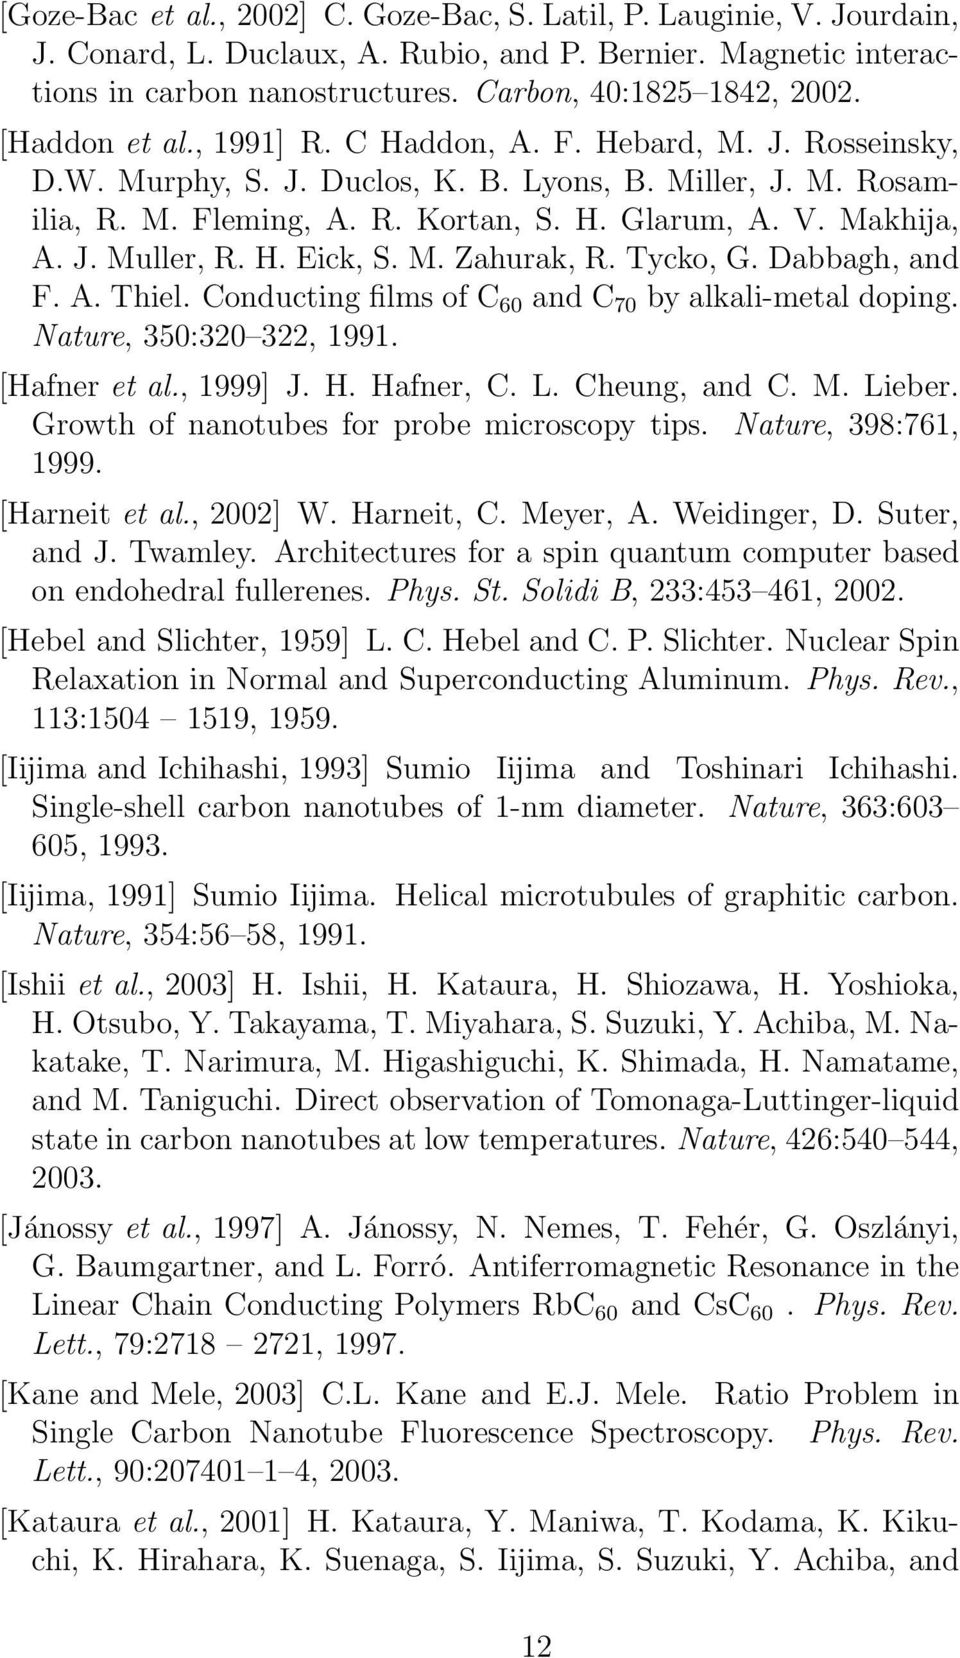 H. Eick, S. M. Zahurak, R. Tycko, G. Dabbagh, and F. A. Thiel. Conducting films of C 60 and C 70 by alkali-metal doping. Nature, 350:320 322, 1991. [Hafner et al., 1999] J. H. Hafner, C. L.